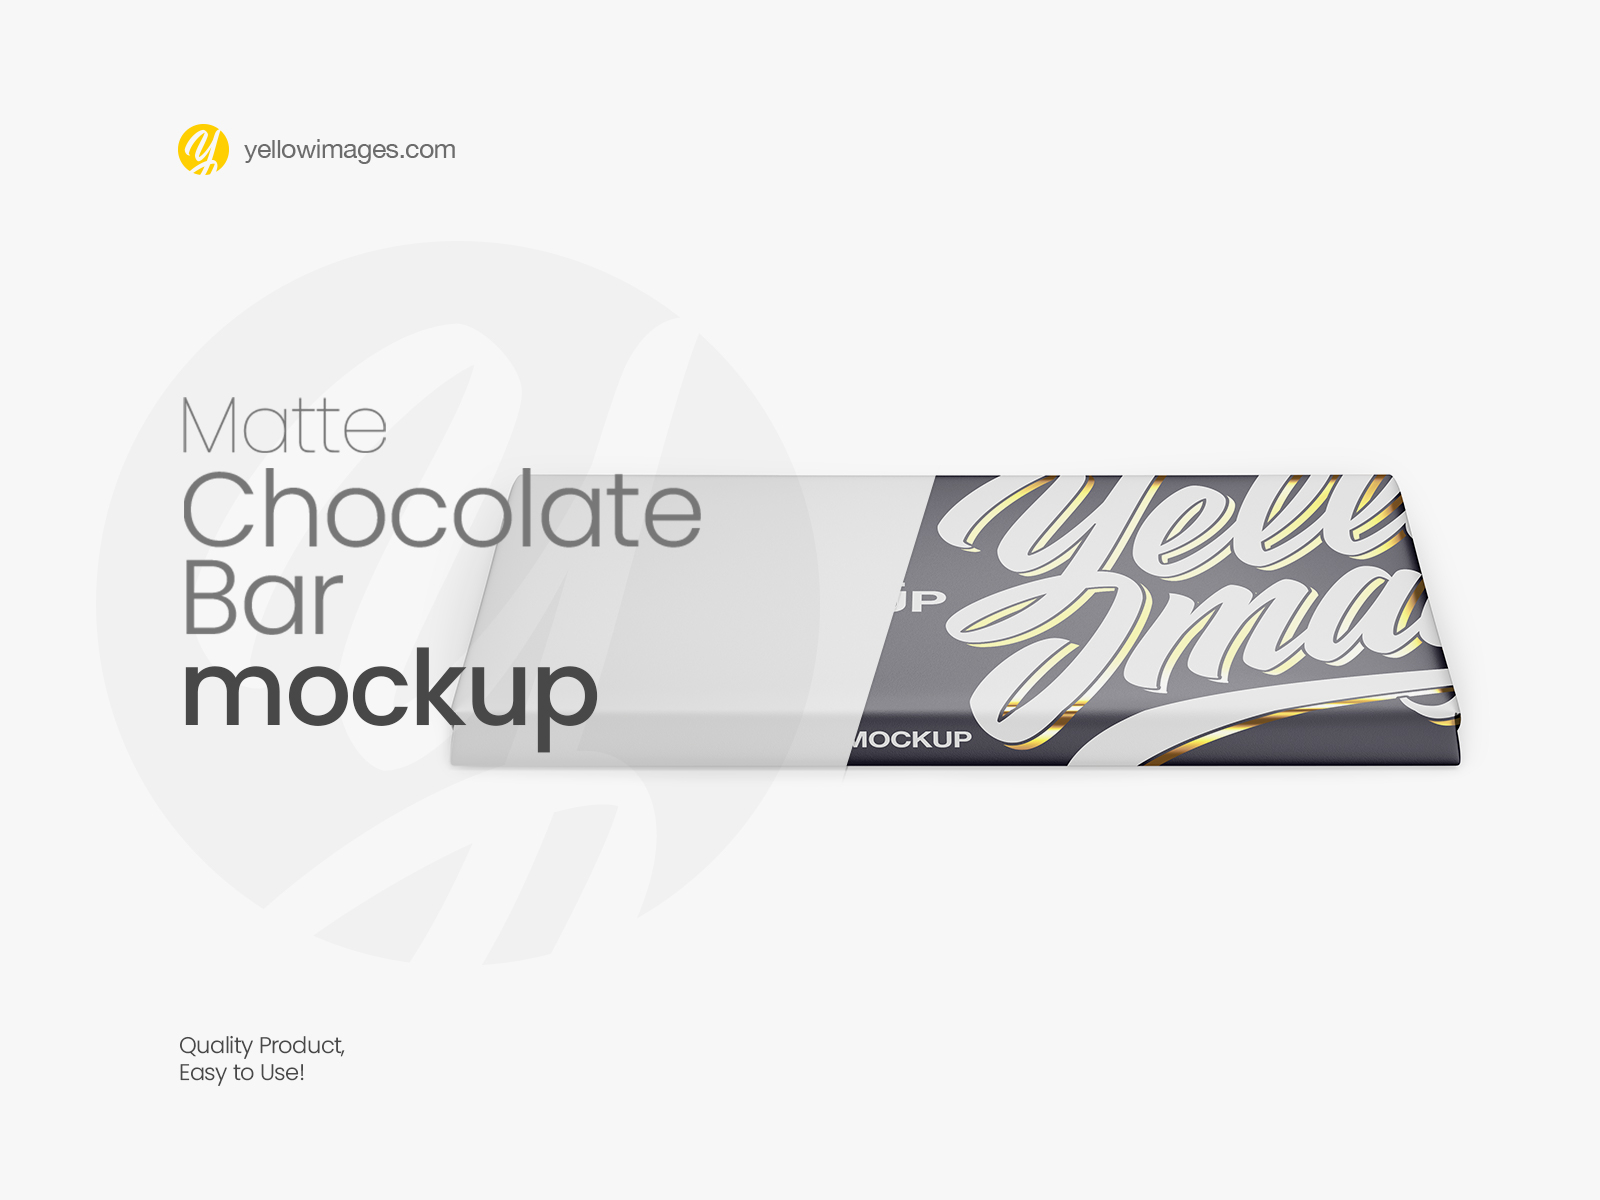 Download Matte Chocolate Bar Mockup By Dmytro Ovcharenko On Dribbble Yellowimages Mockups